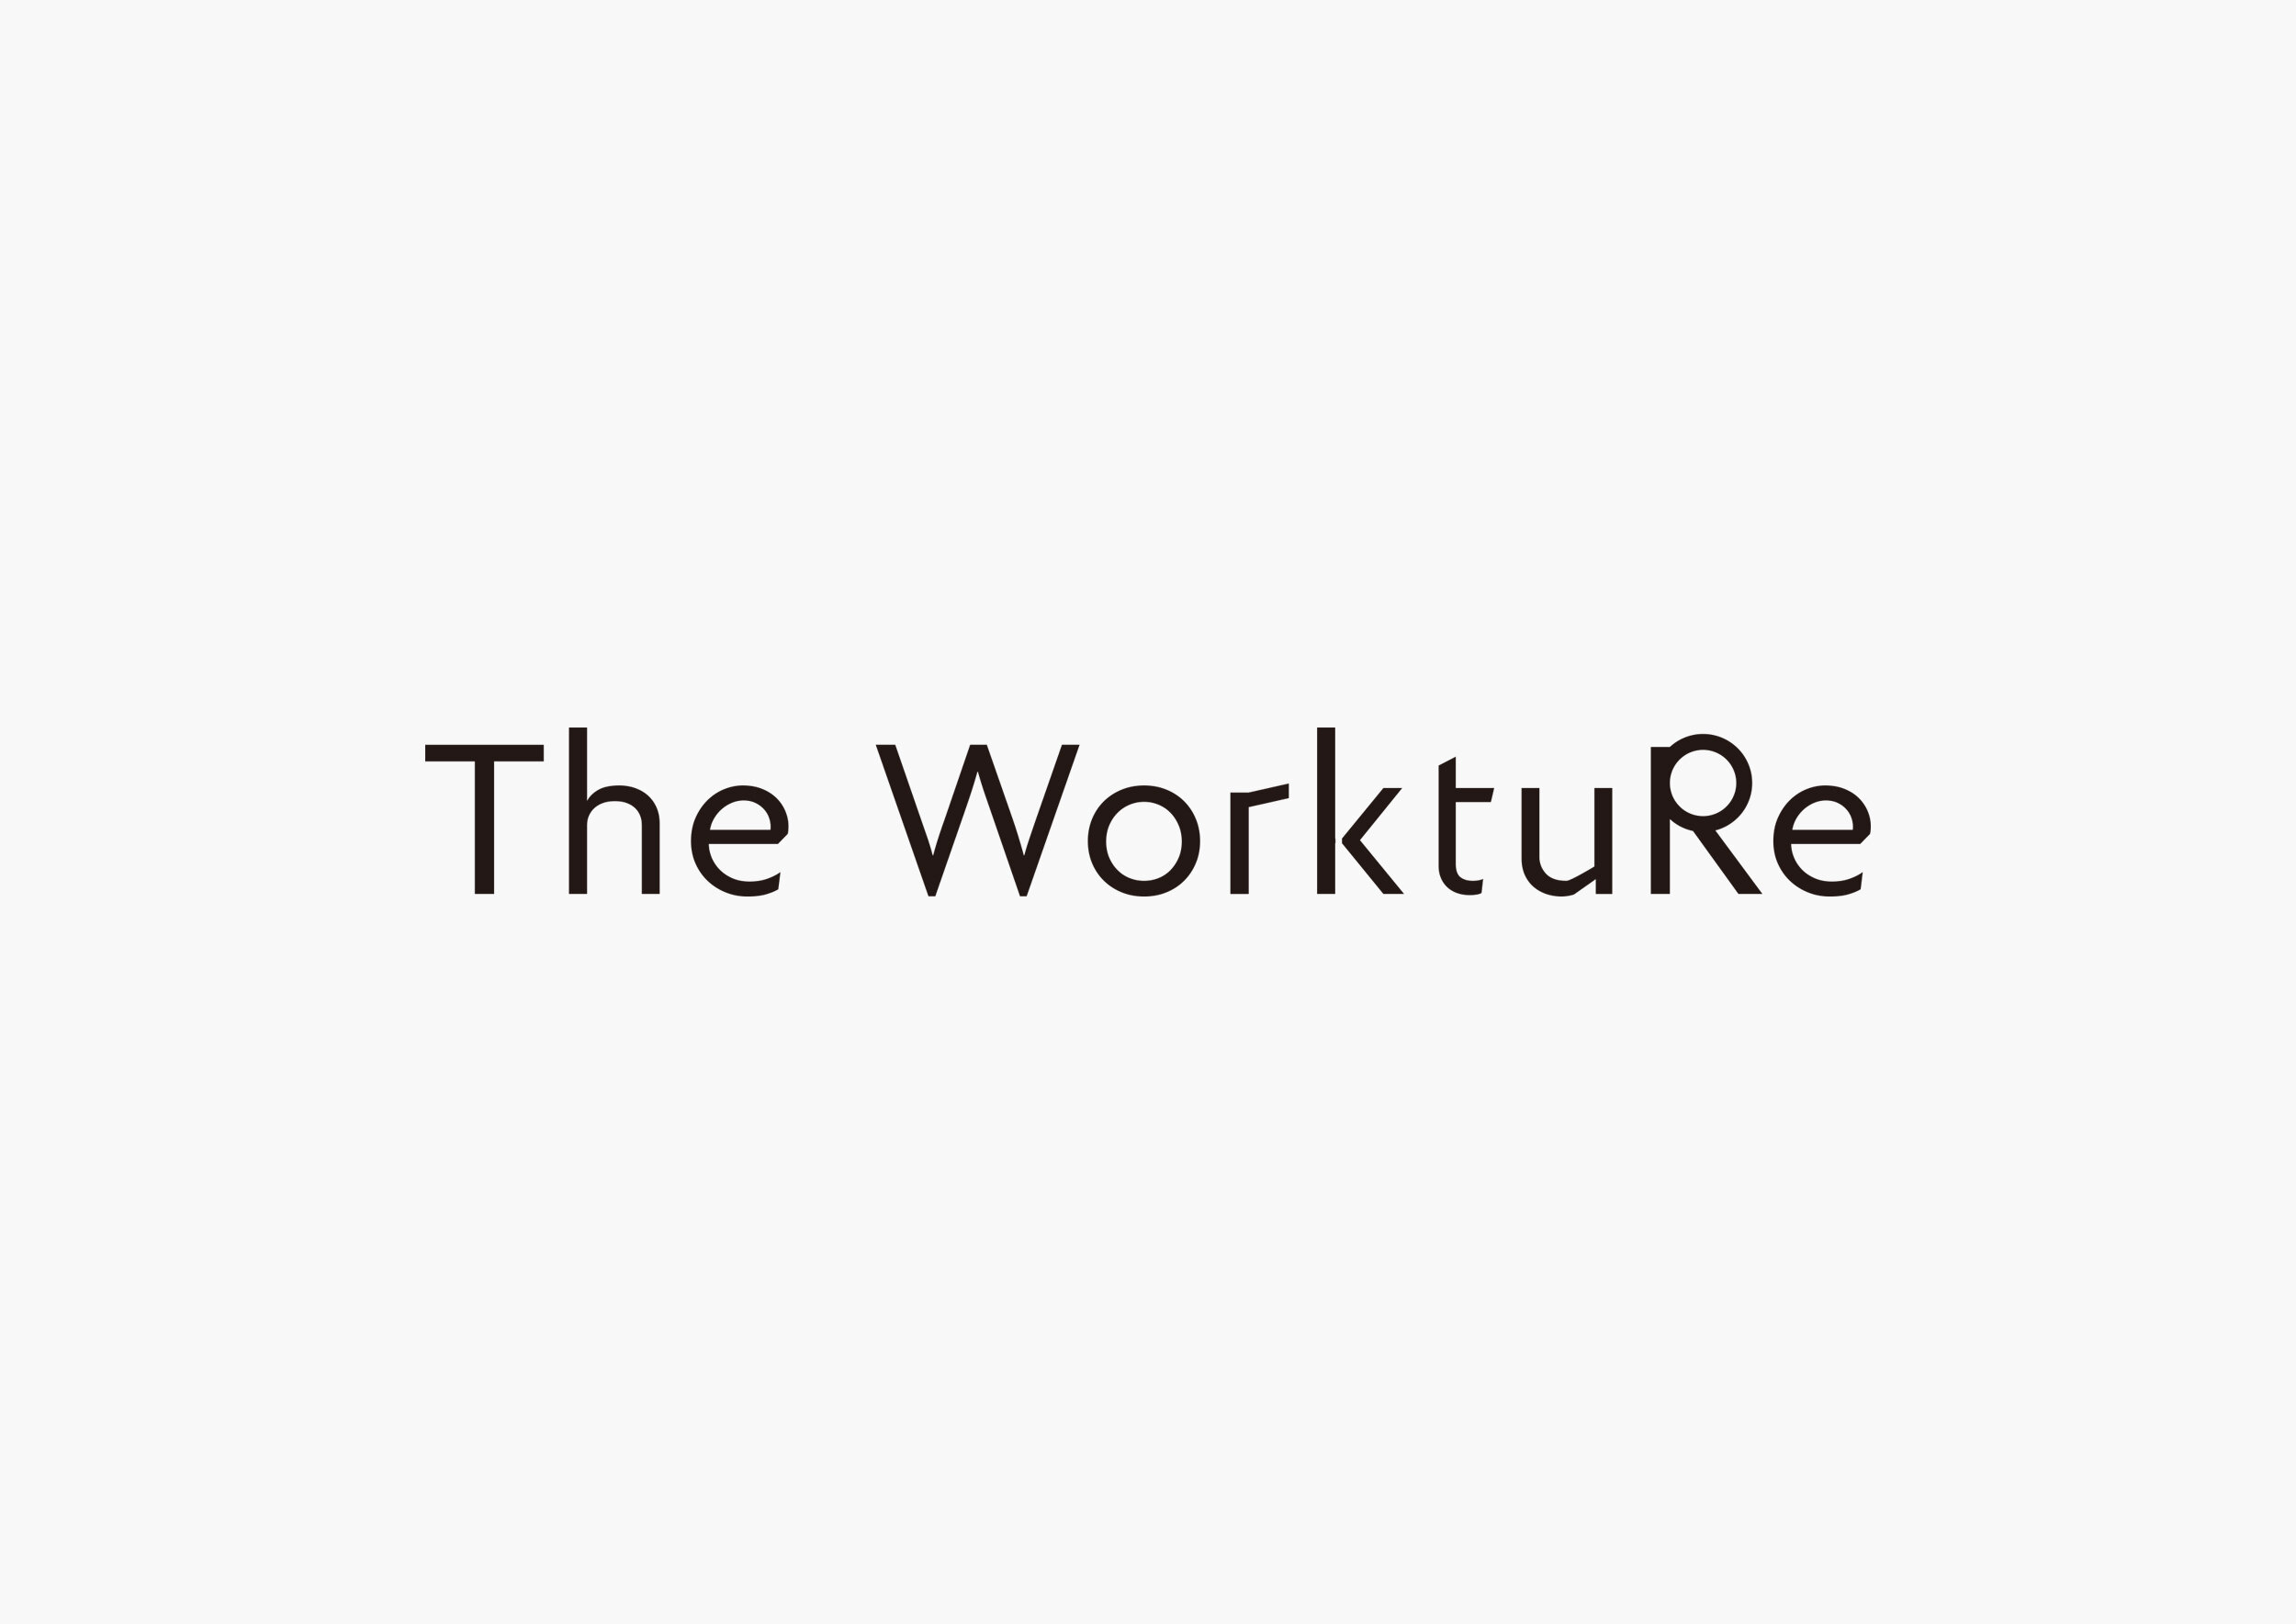 The WorktuRe